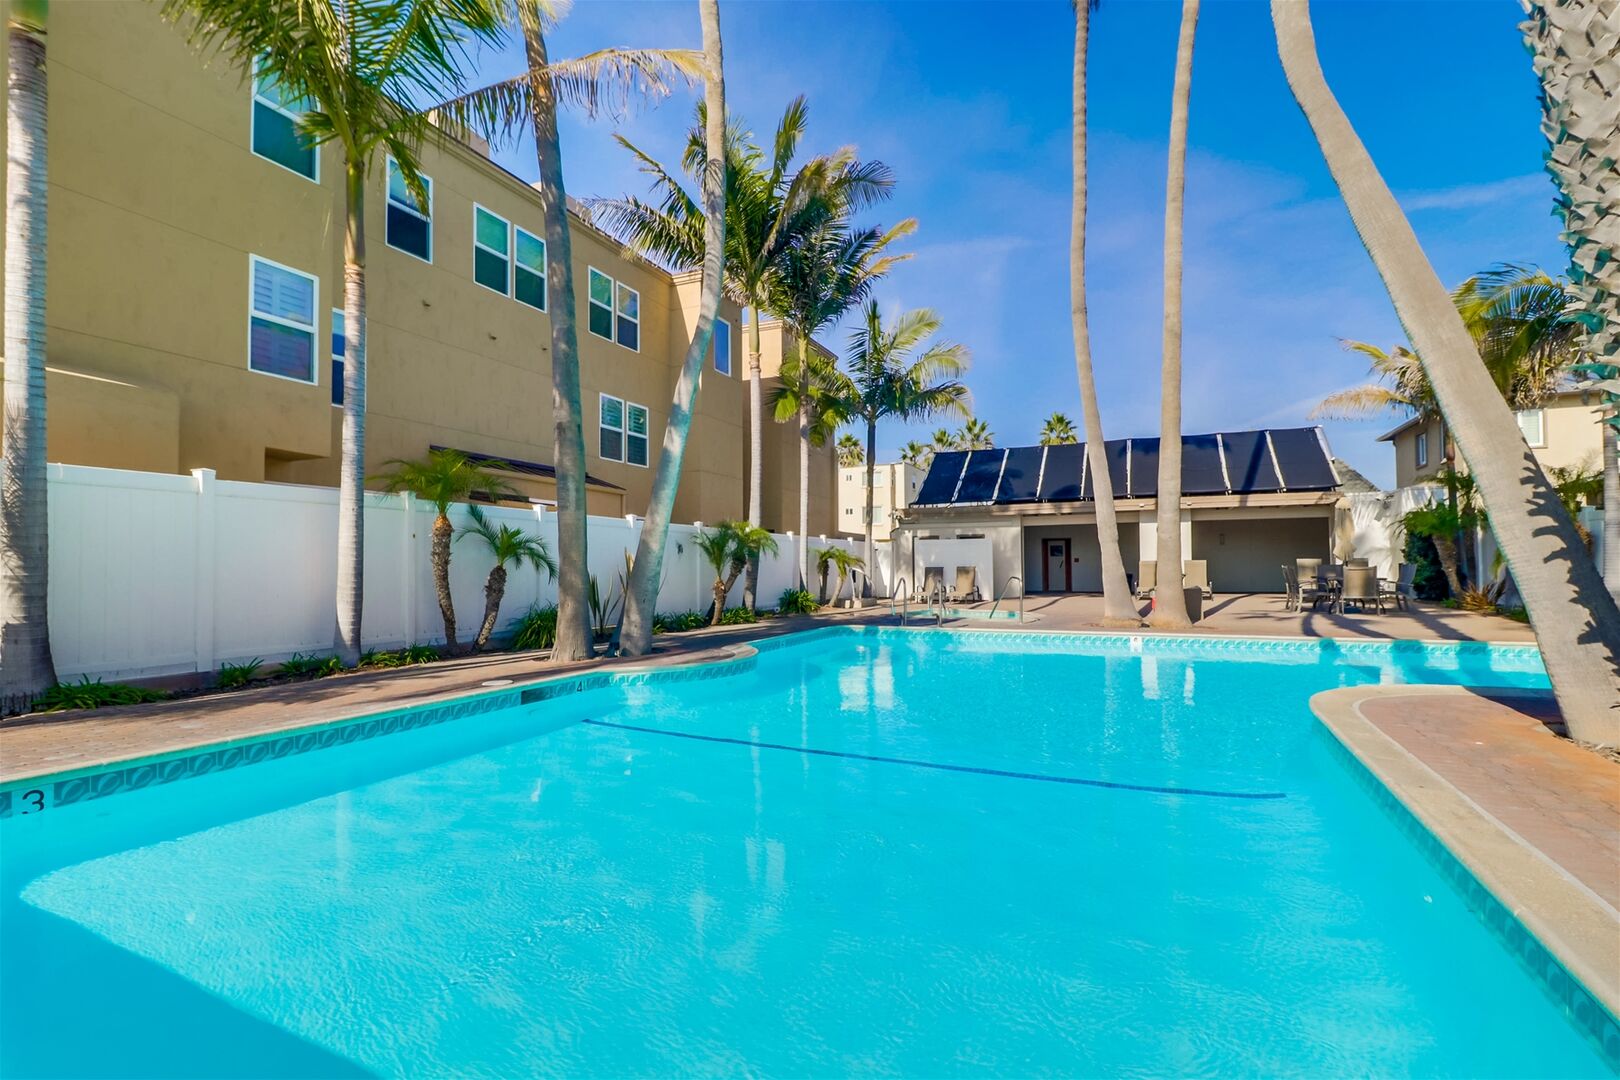 Capri by the Sea has a private pool and hot tub area accessed with guest fob only. Located on the ground floor just behind the complex about half way on the block. Pool is heated year round!